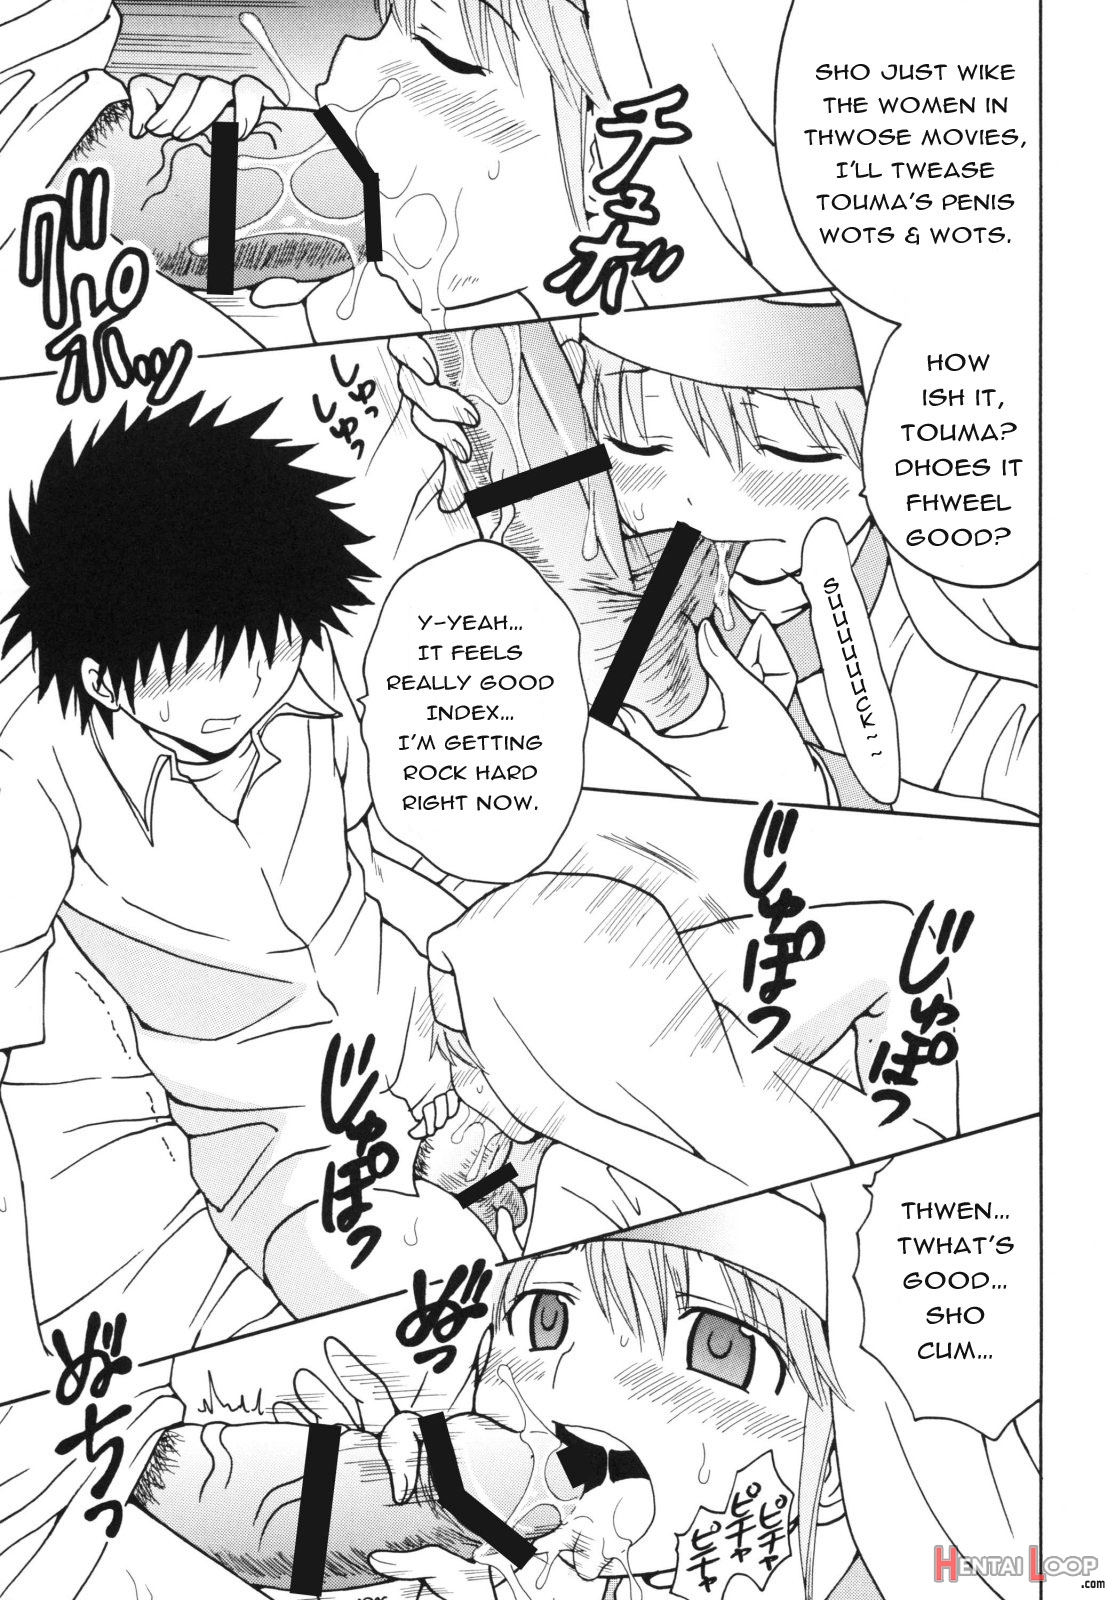 A Certain Magical Lewd Index #2 page 27